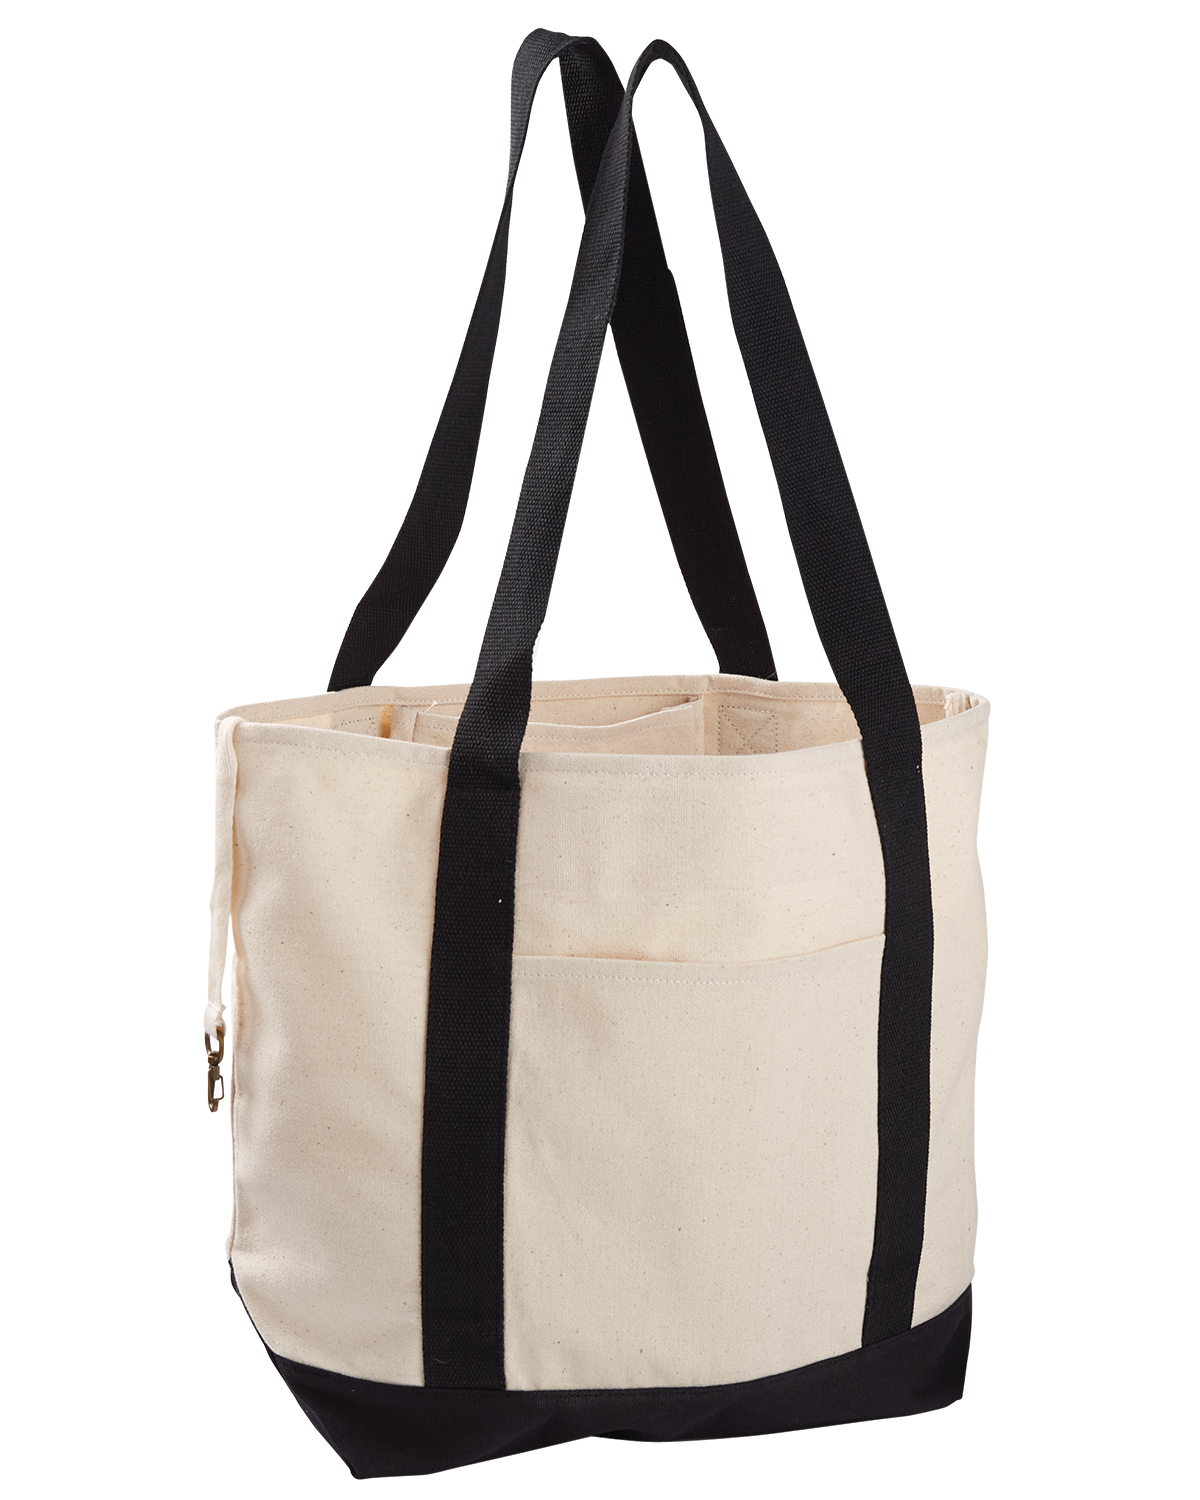 BAGedge BE004 Canvas Boat Tote $6.33 - Bags